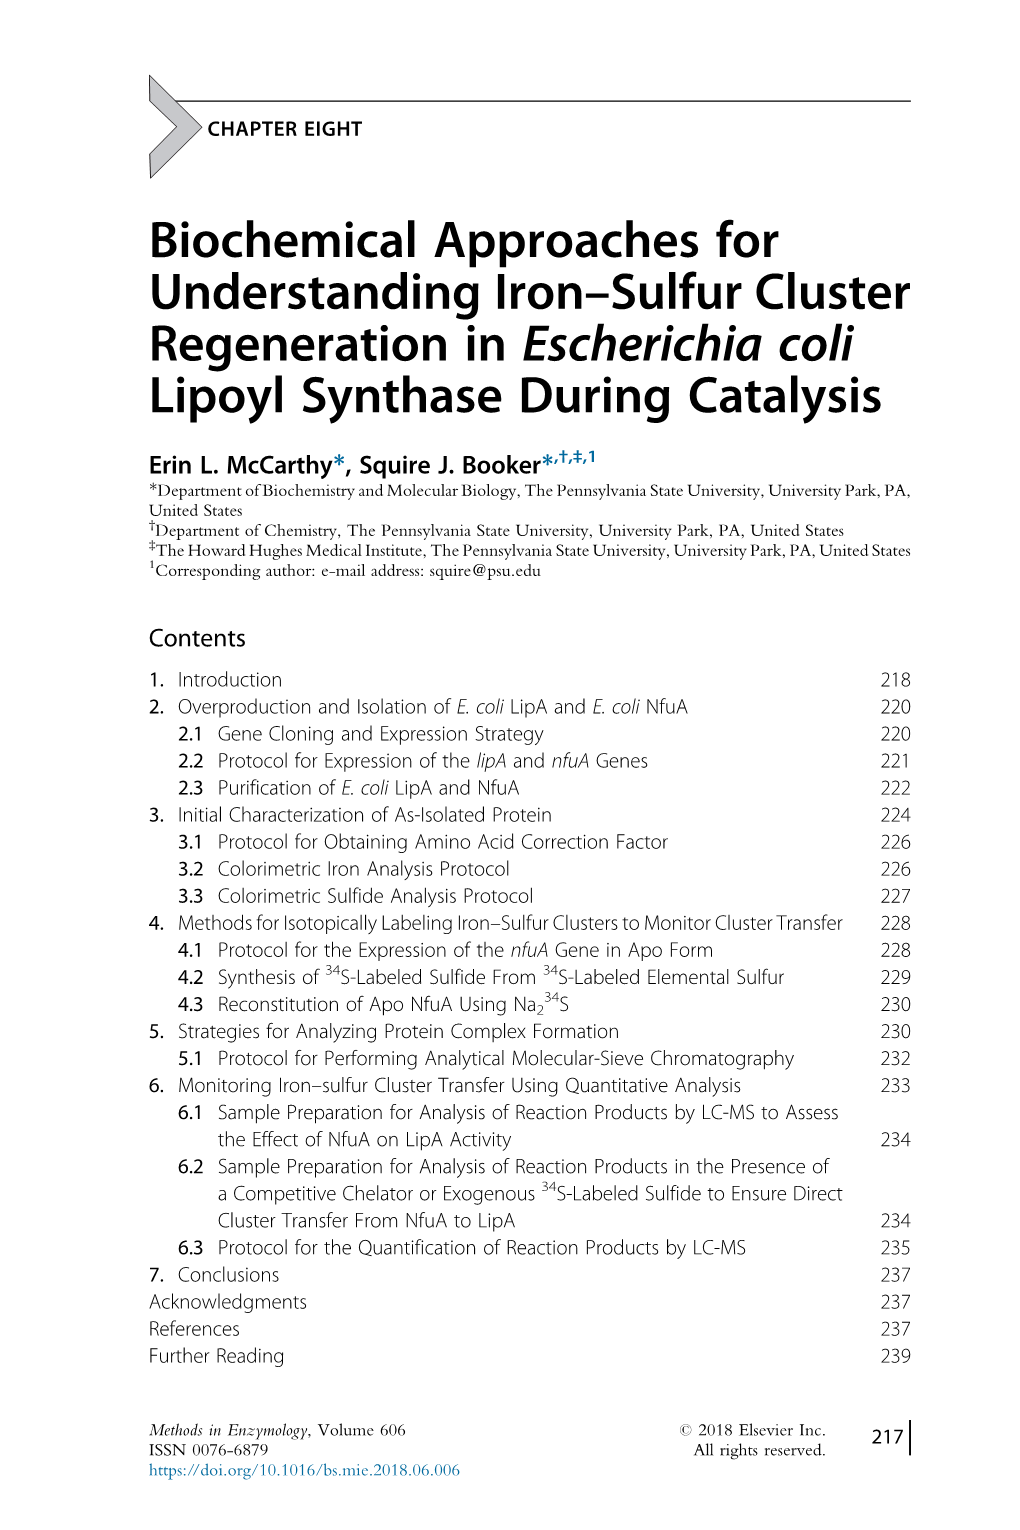 Biochemical Approaches for Understanding Iron-Sulfur Cluster